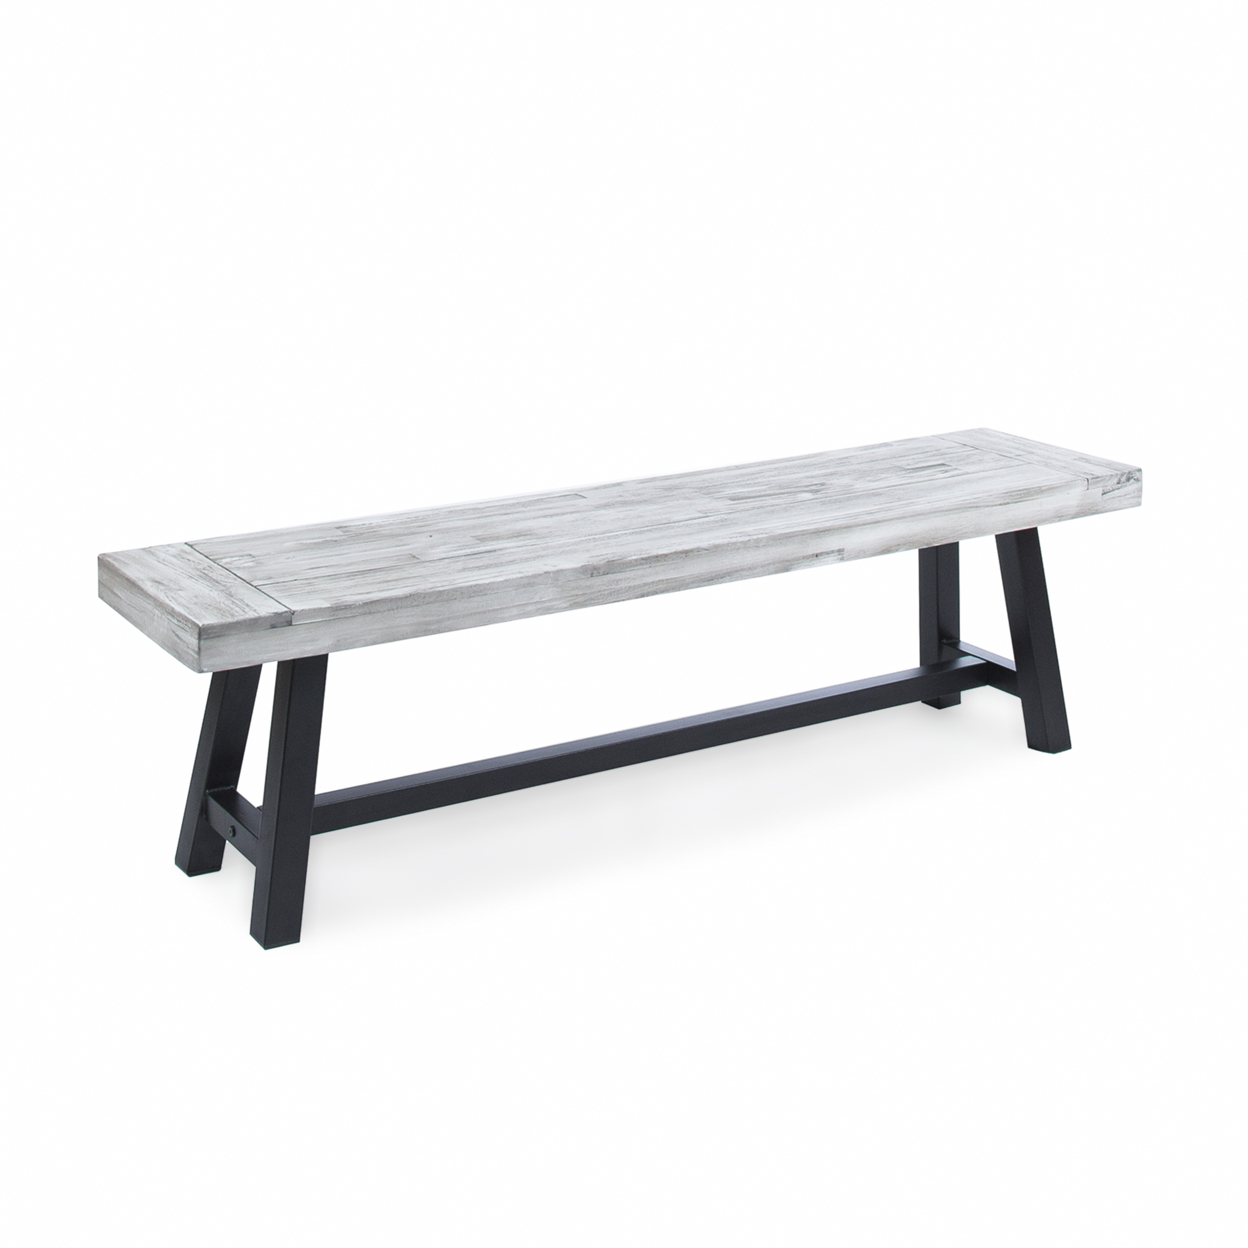 Angelina Indoor Farmhouse Acacia Wood Dining Bench With Rustic Metal Finish Frame - Light Gray/Black